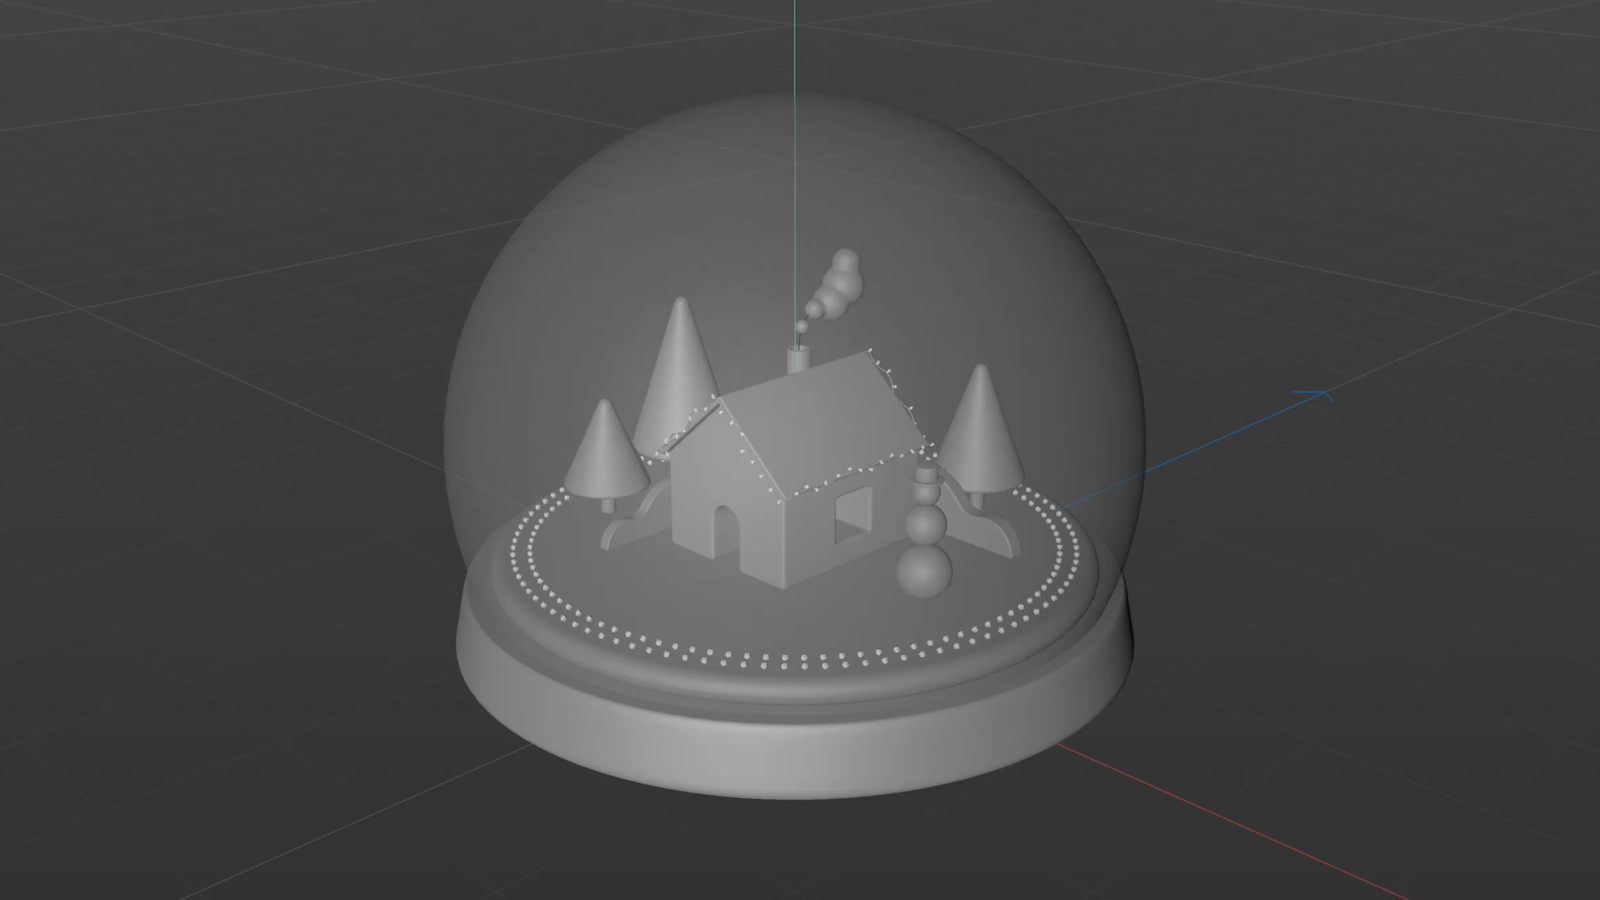 A house and winter scene are added into the snow globe.